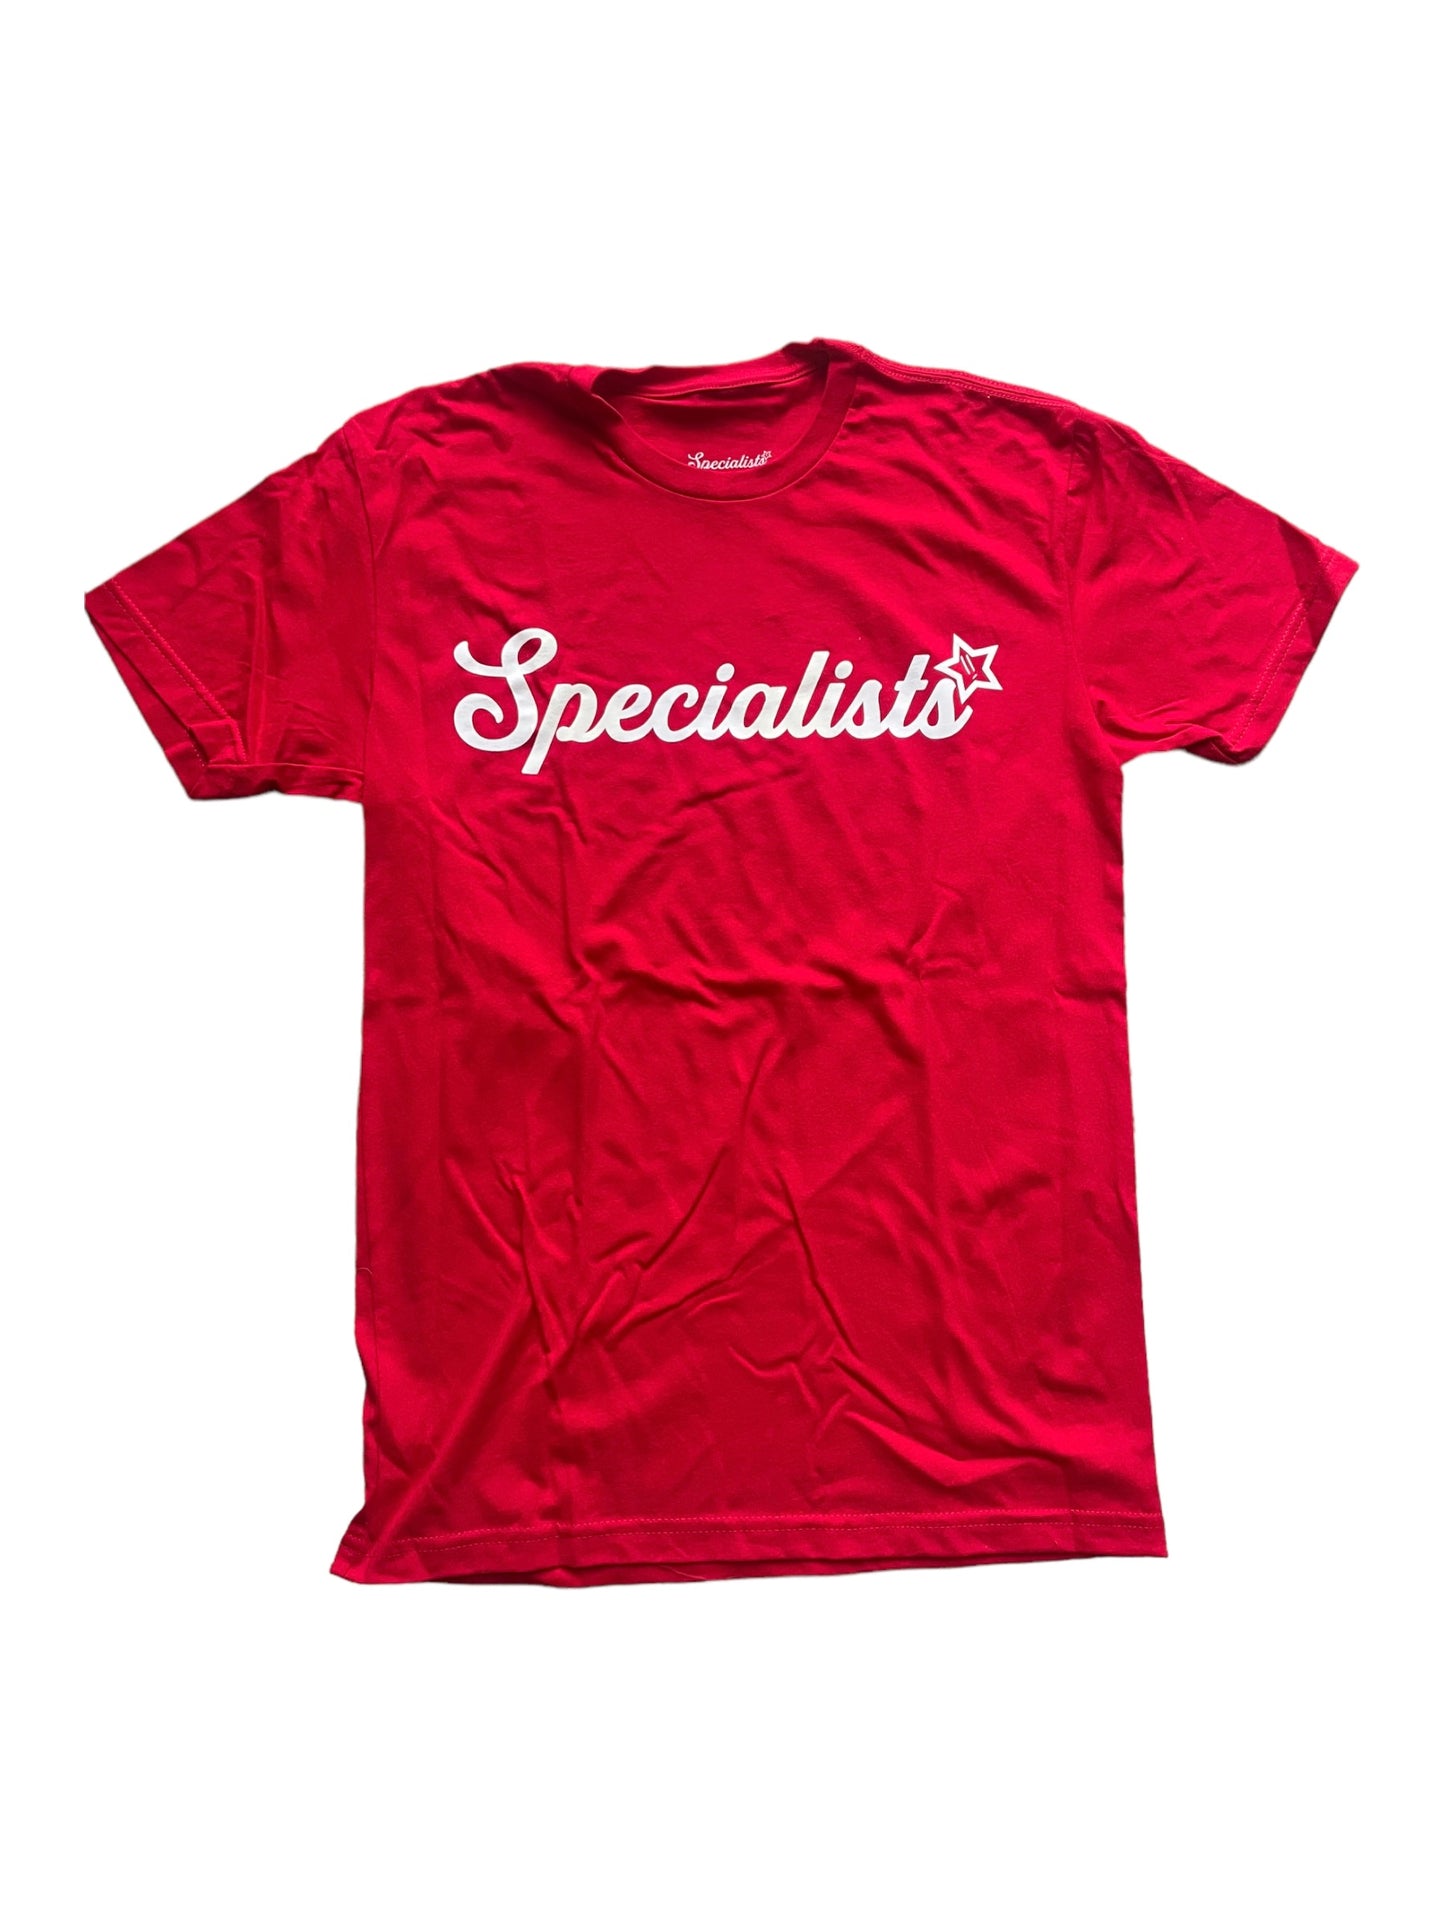 Specialists Tee: Red